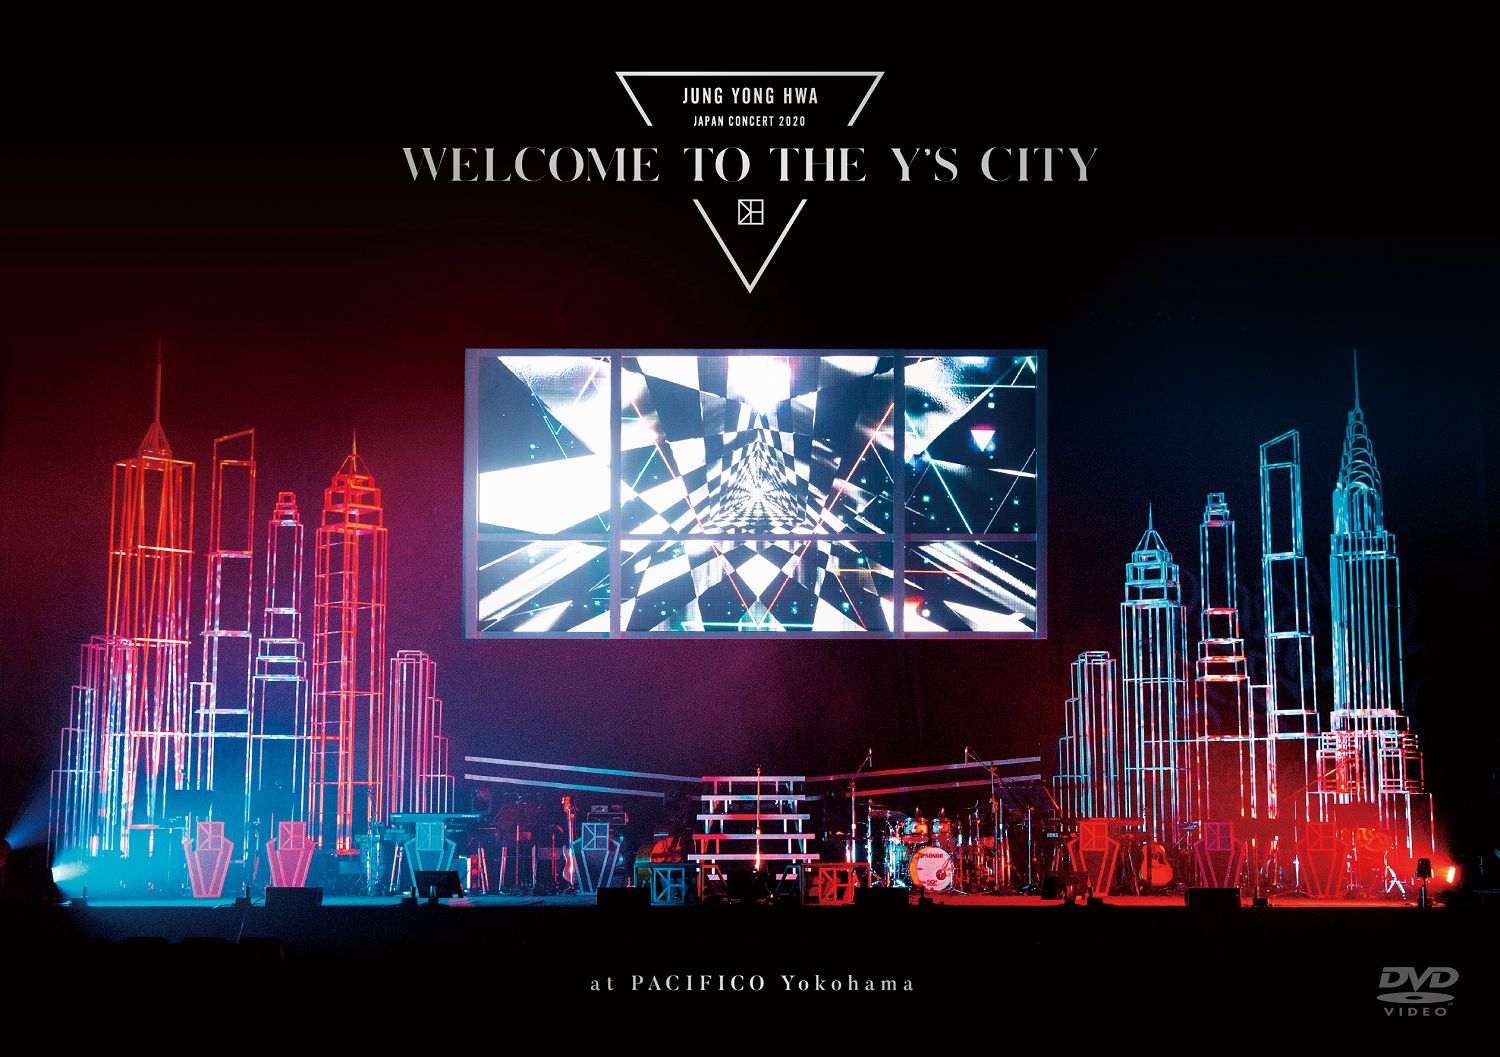 JUNG YONG HWA JAPAN CONCERT 2020 “WELCOME TO THE Y'S CITY”